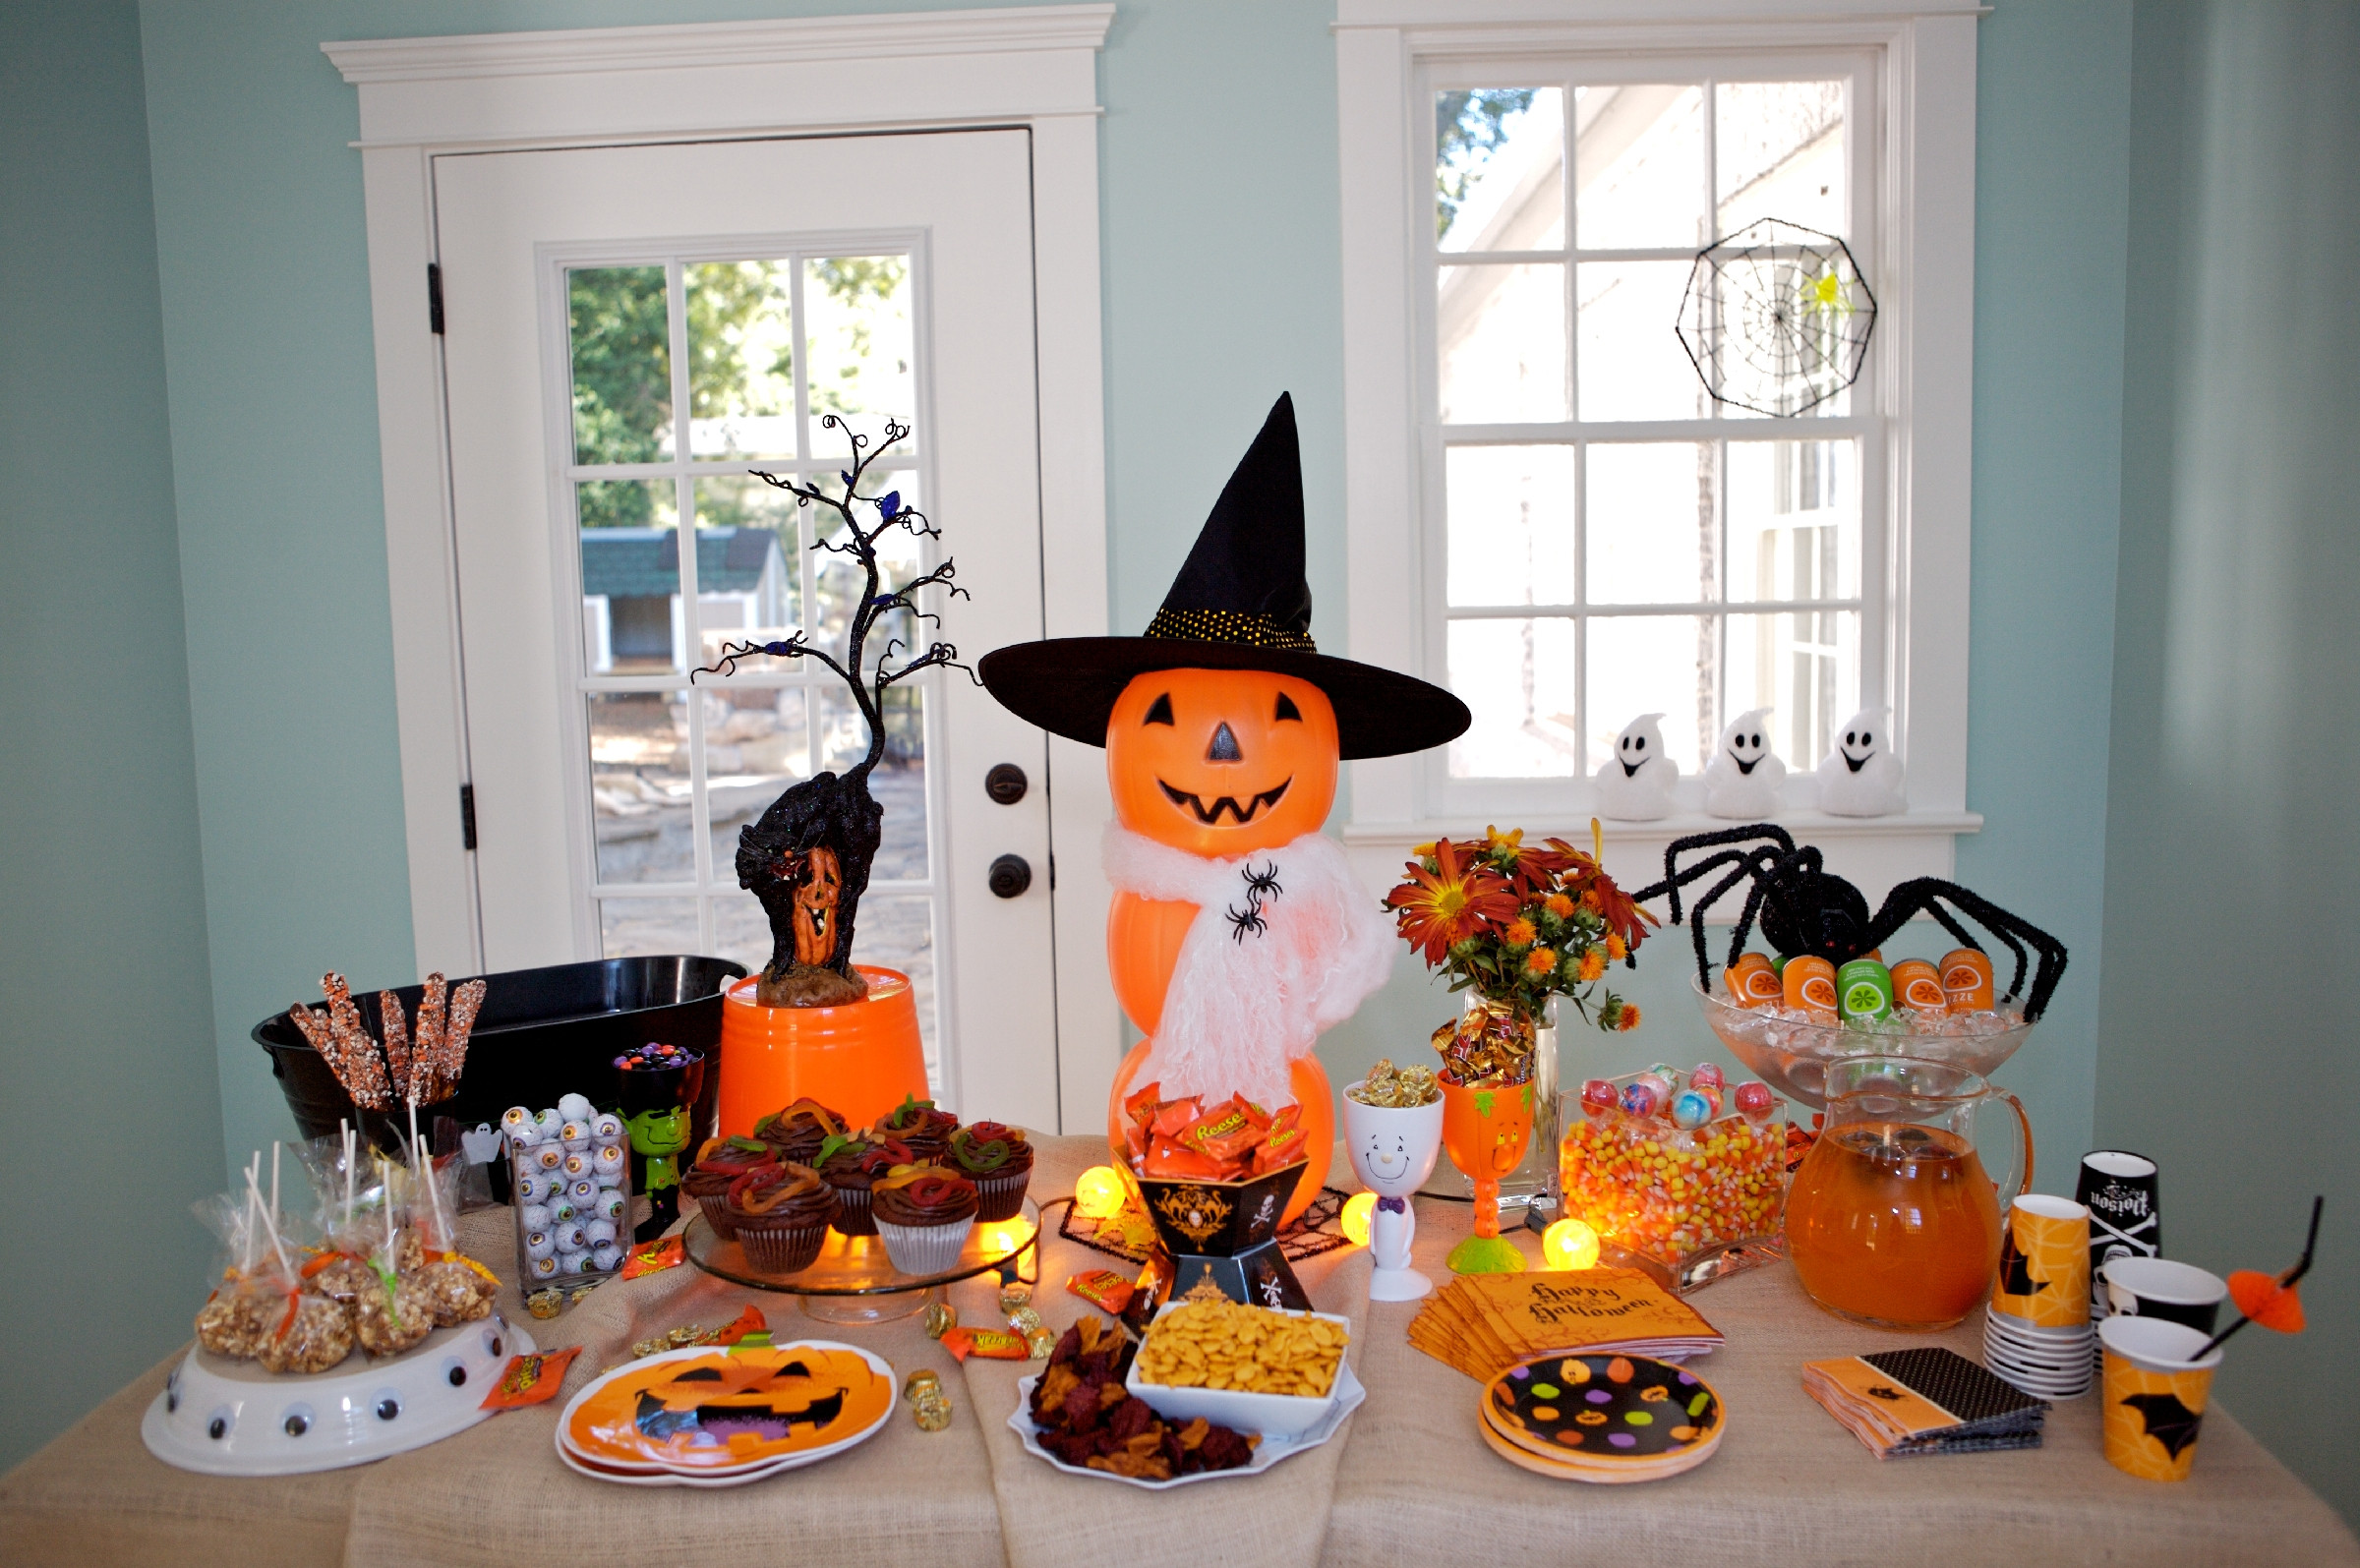 Halloween Table Decorations
 Martie Knows Parties BLOG Host a Neighborhood